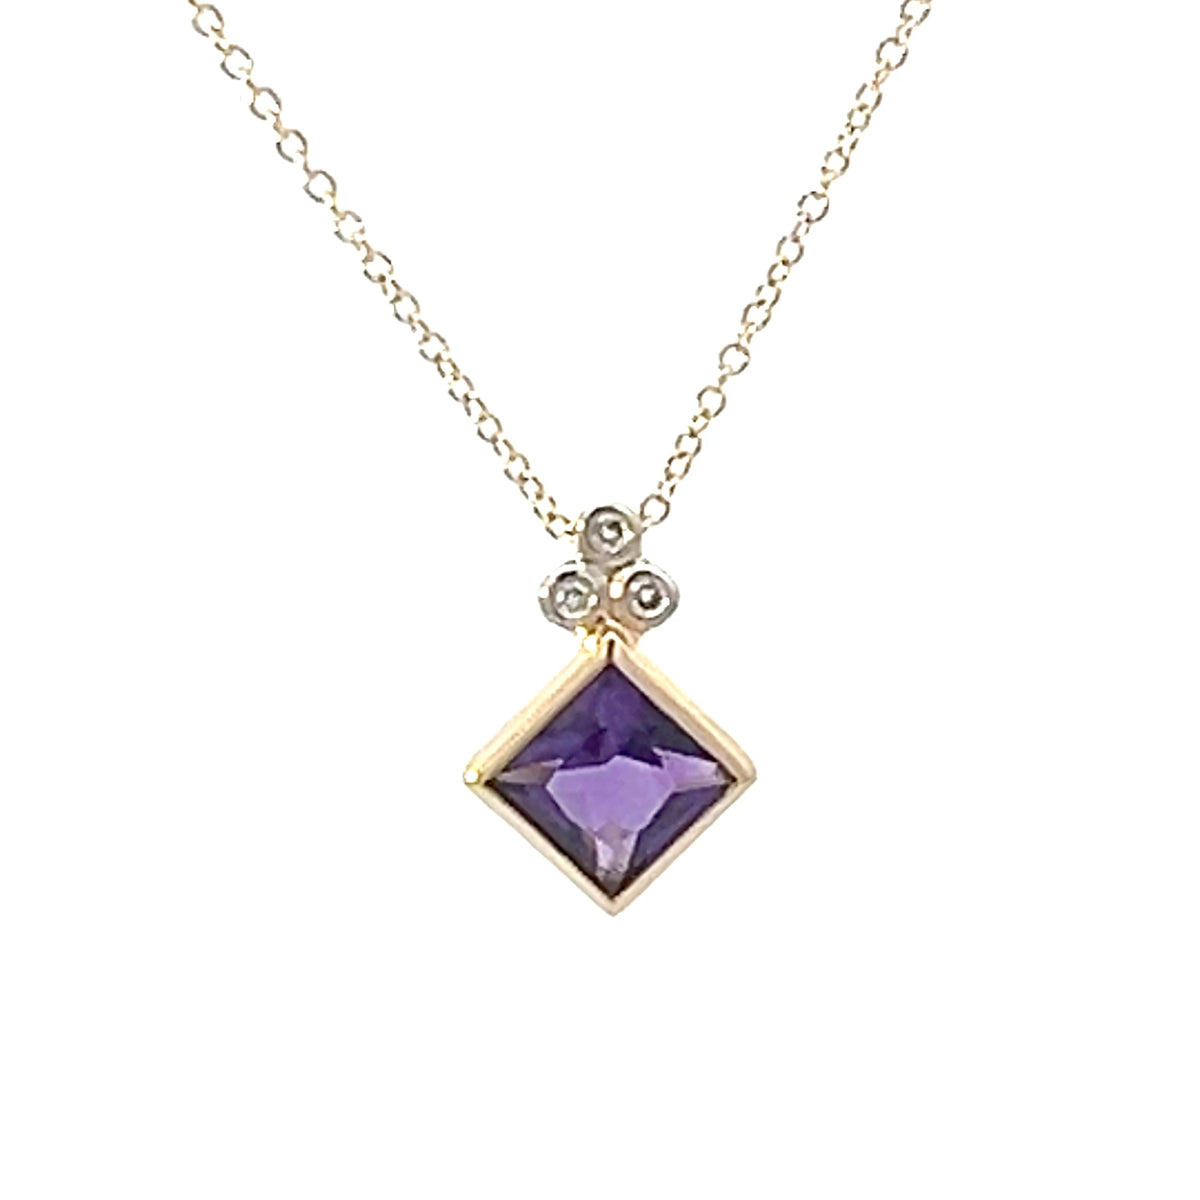 10K Yellow Gold Amethyst and Diamond Necklace - 18 Inches